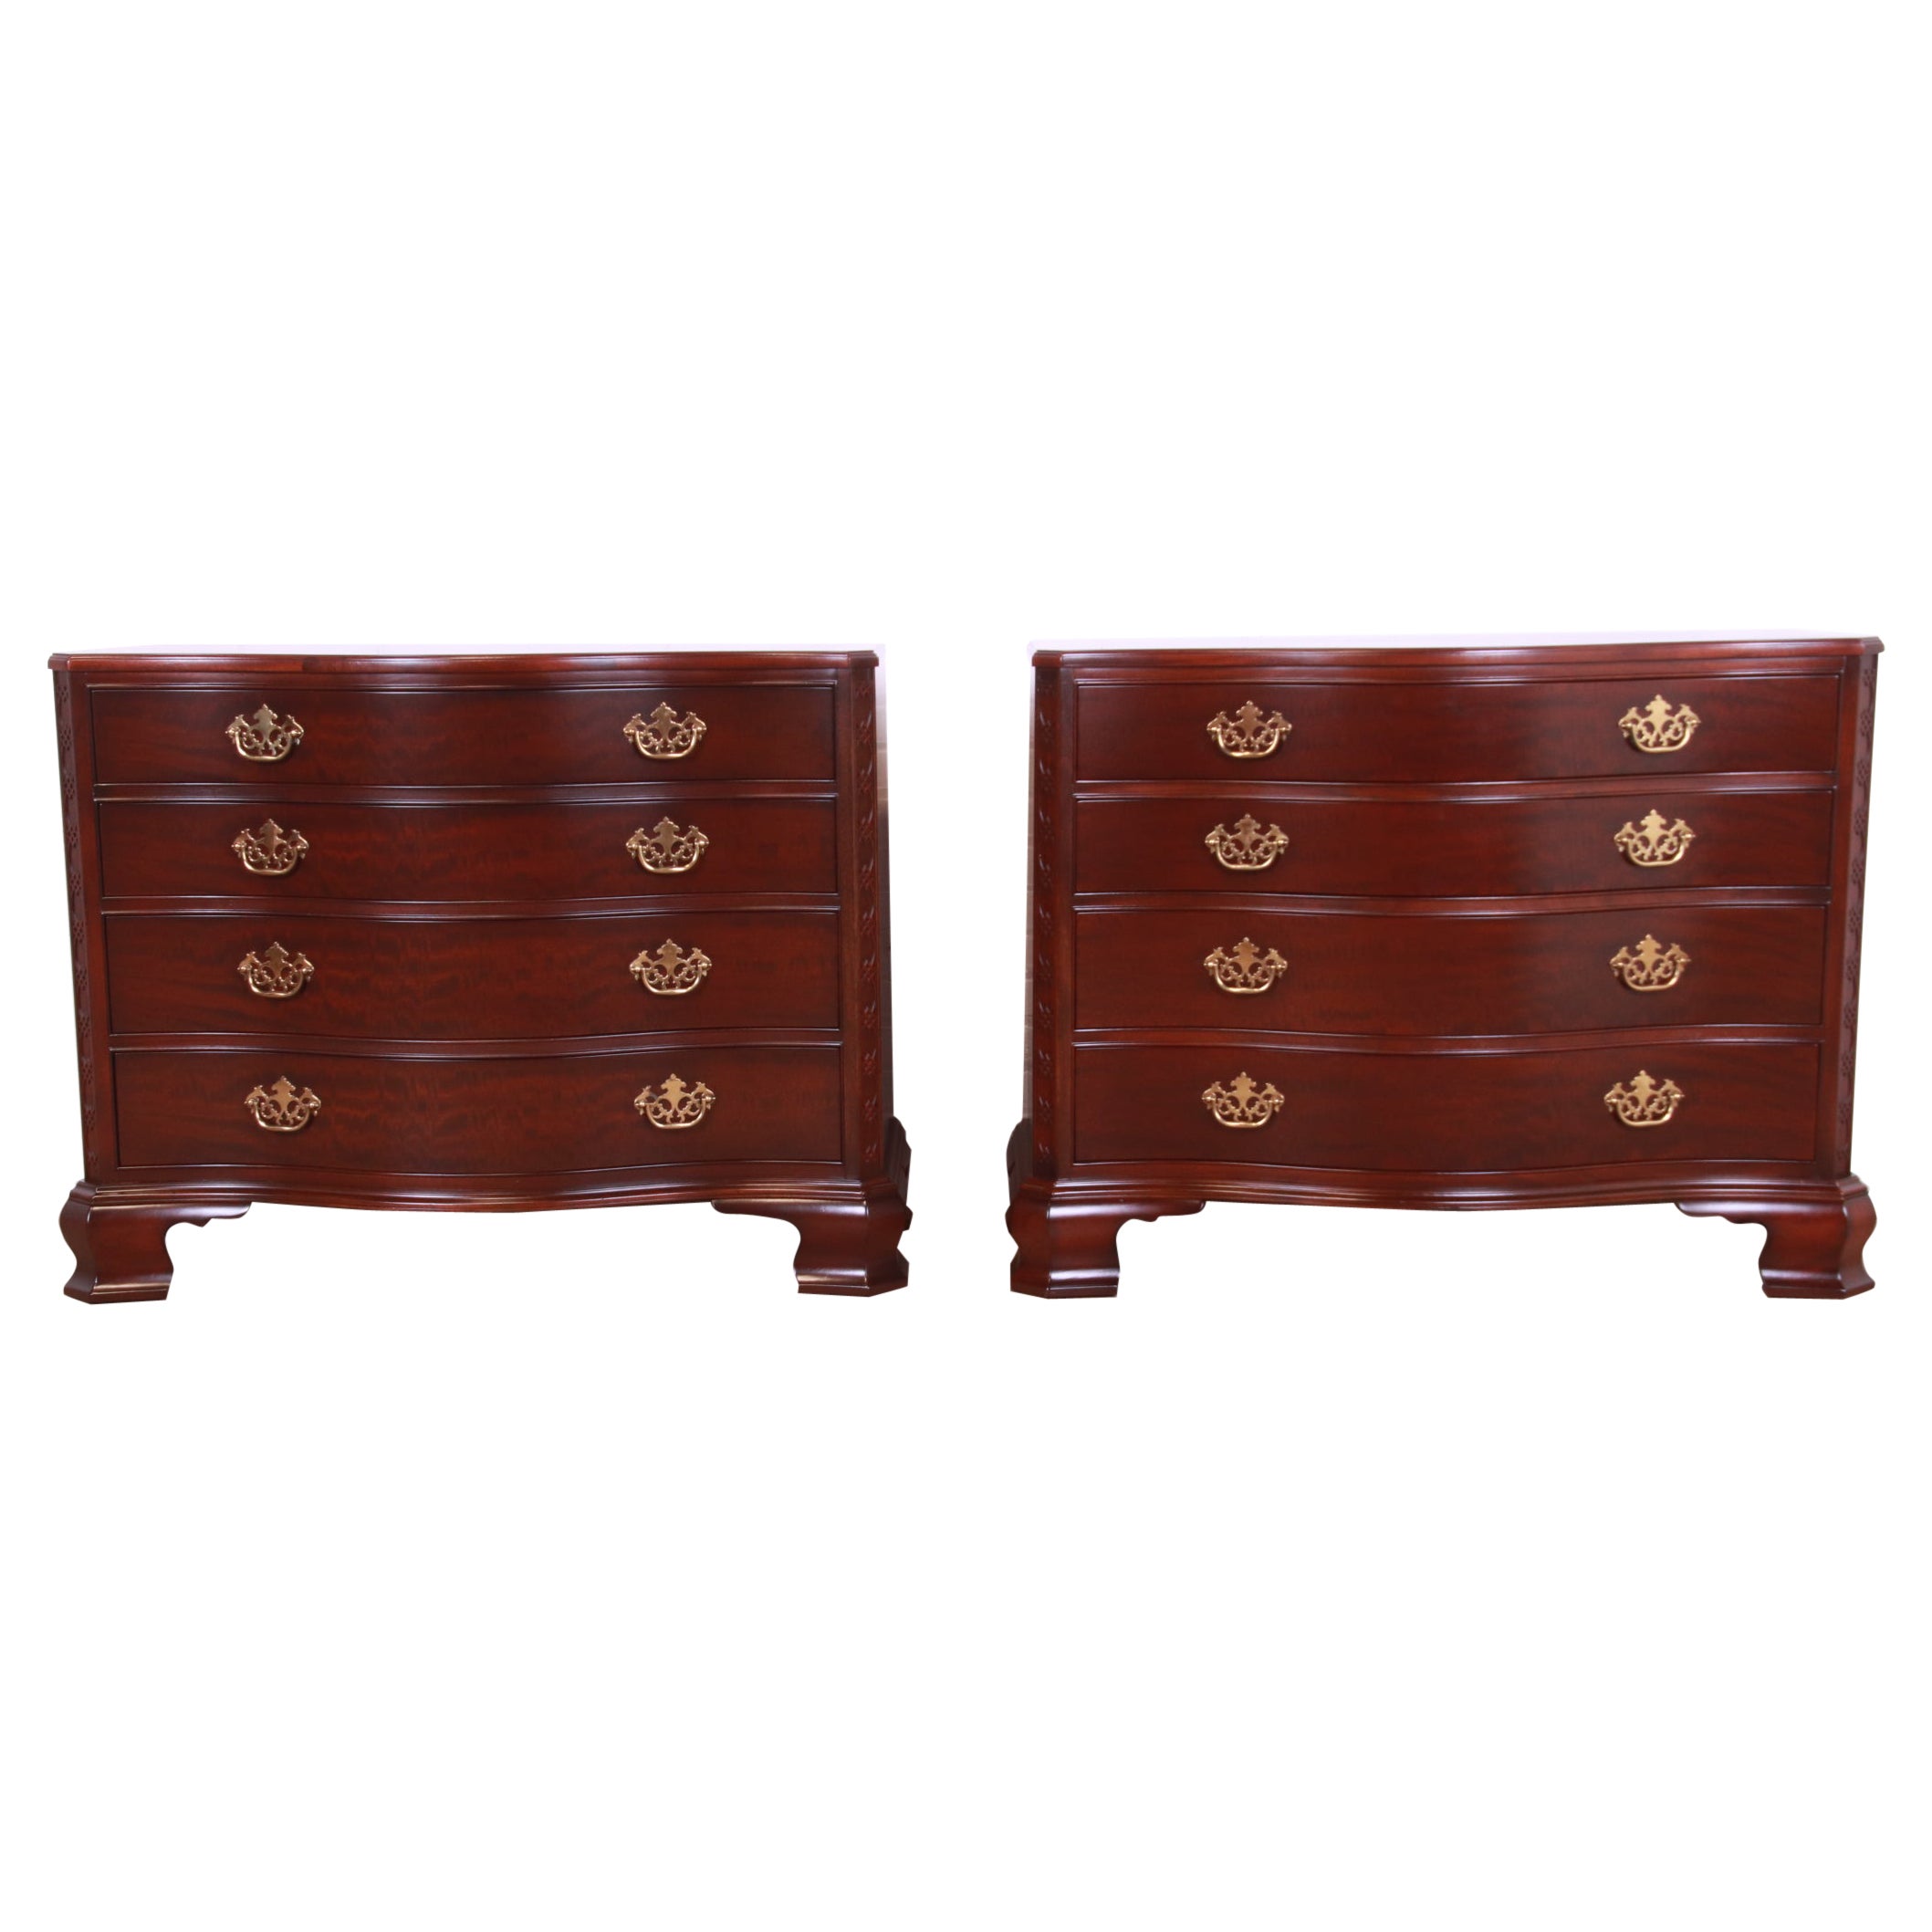 Baker Furniture Chippendale Carved Mahogany Serpentine Dresser Chests, Pair For Sale